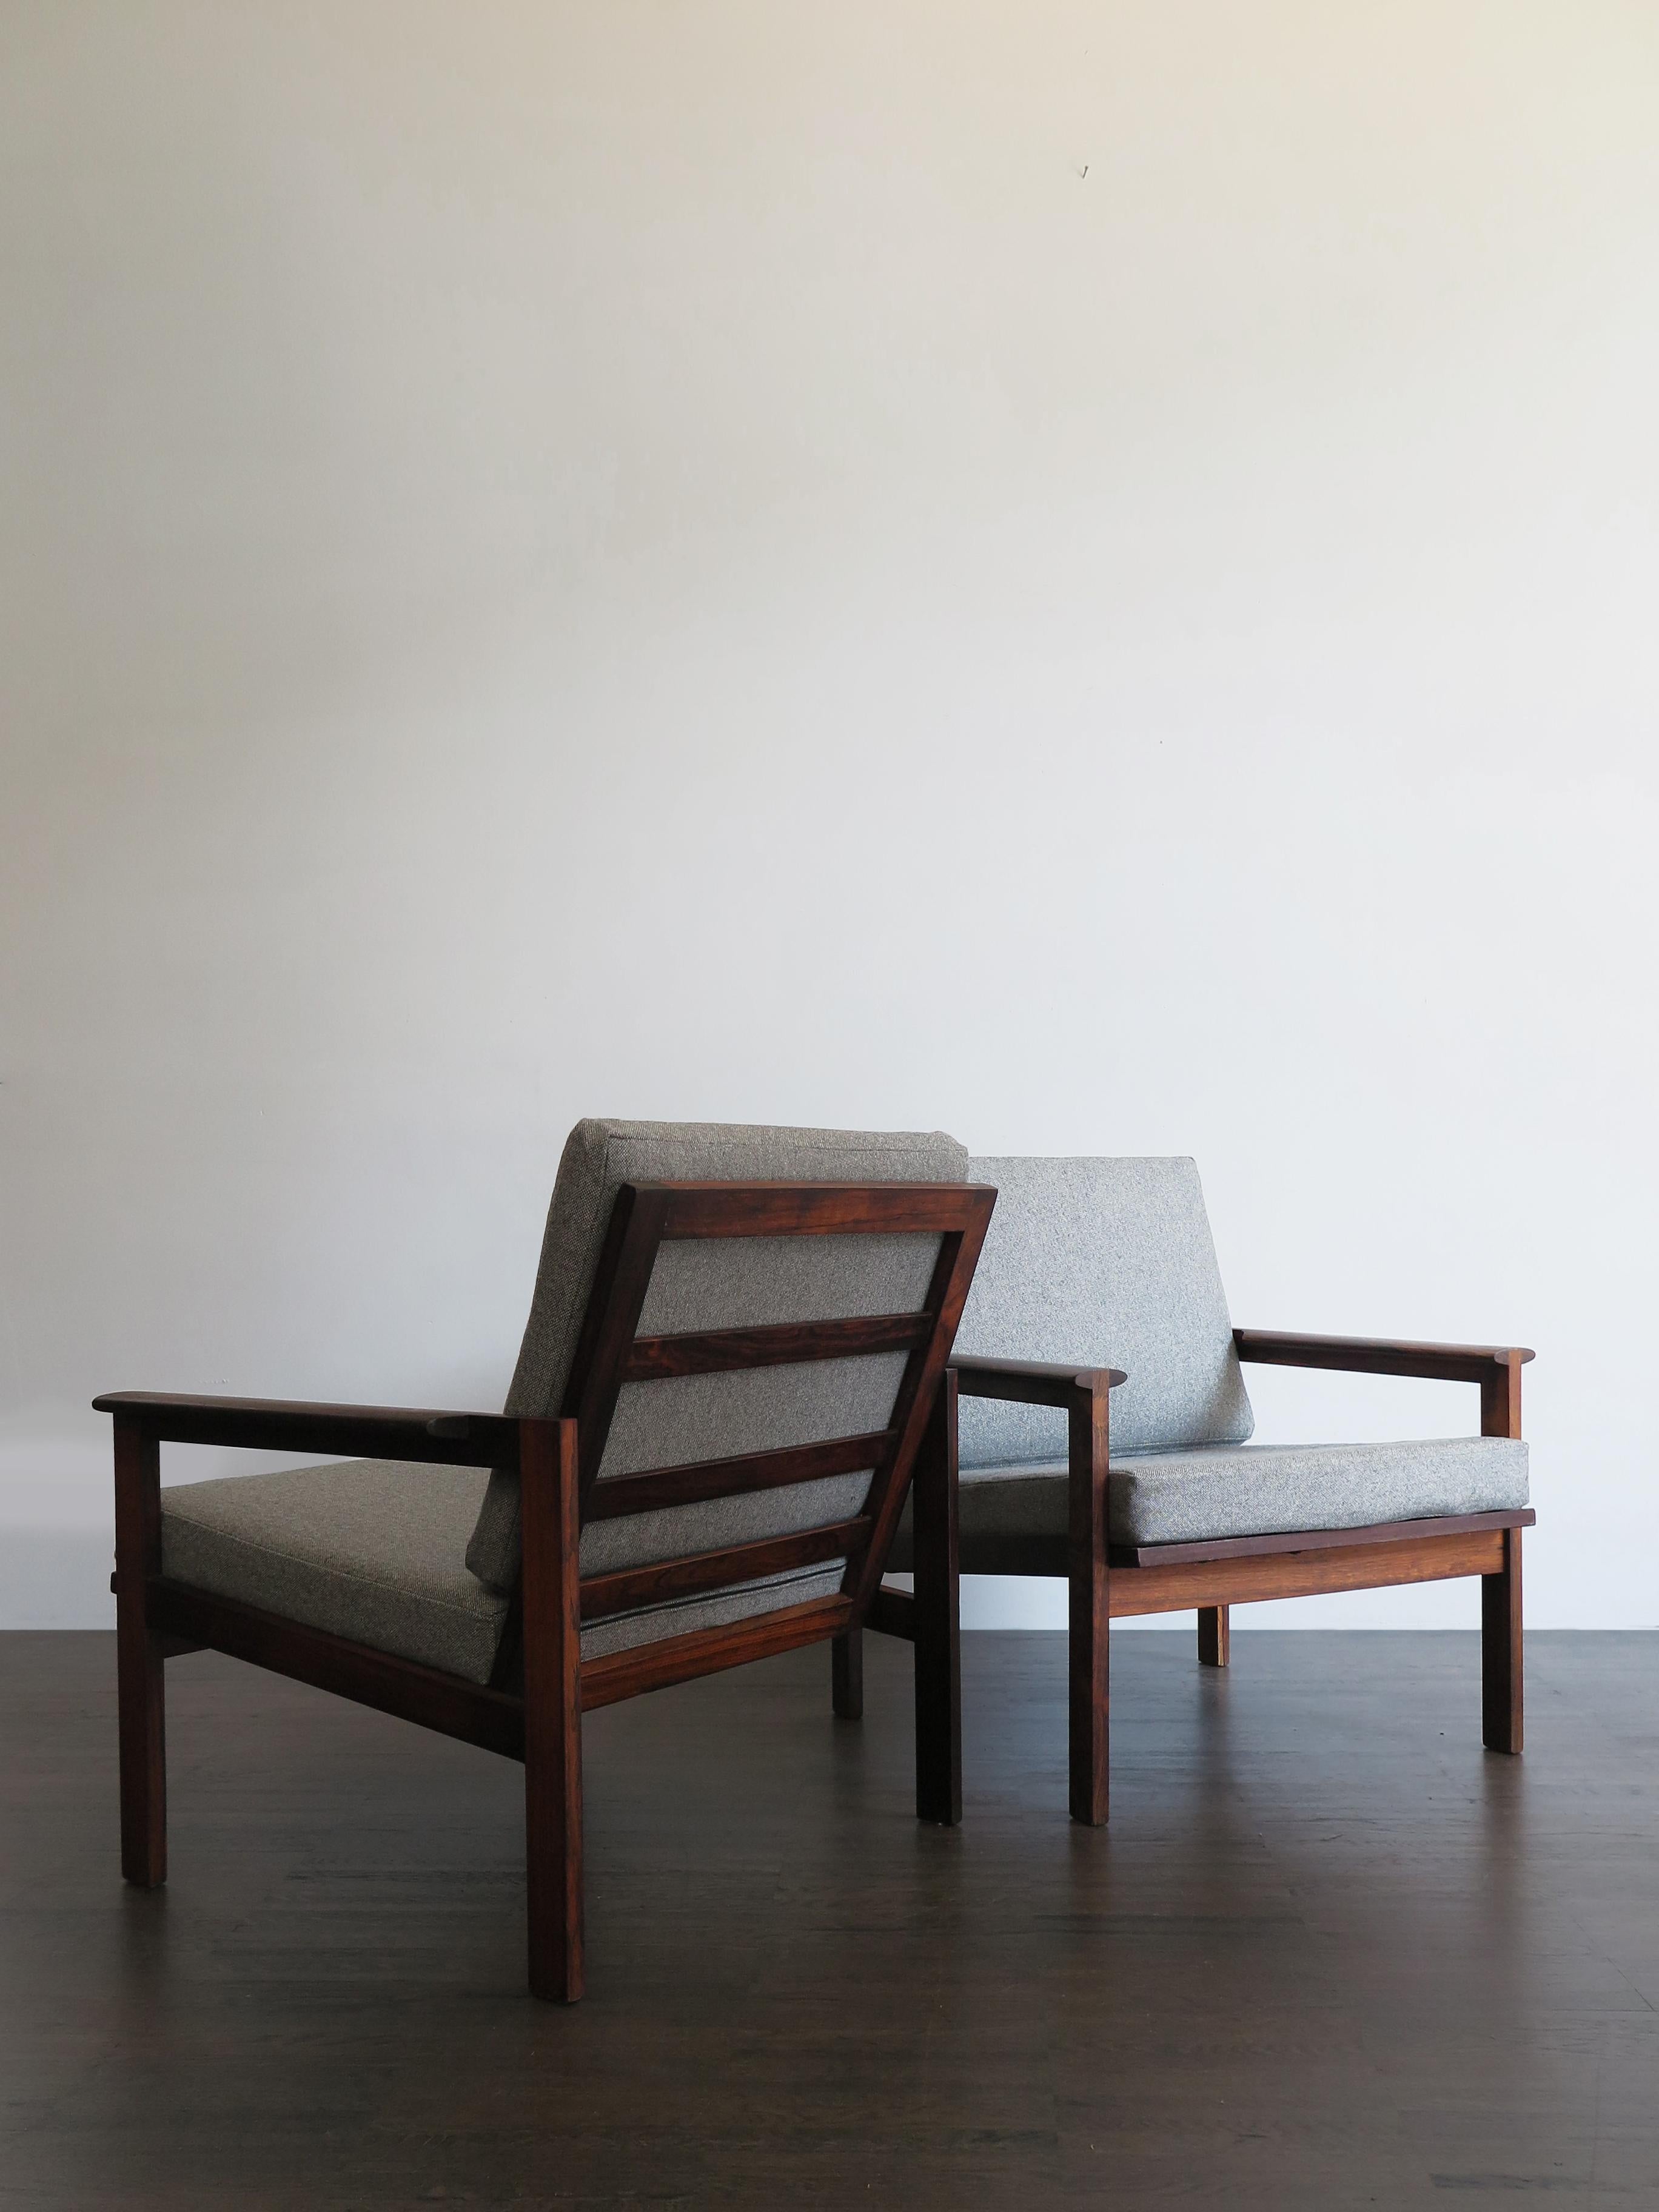 Couple of scandinavian midcentury modern design original armchairs model Capella designed by Illum Wikkelsø and produced by Niels Eilersen with structure in solid dark wood and new grey reupholstered cushions, Denmark 1960s.

Please note that the